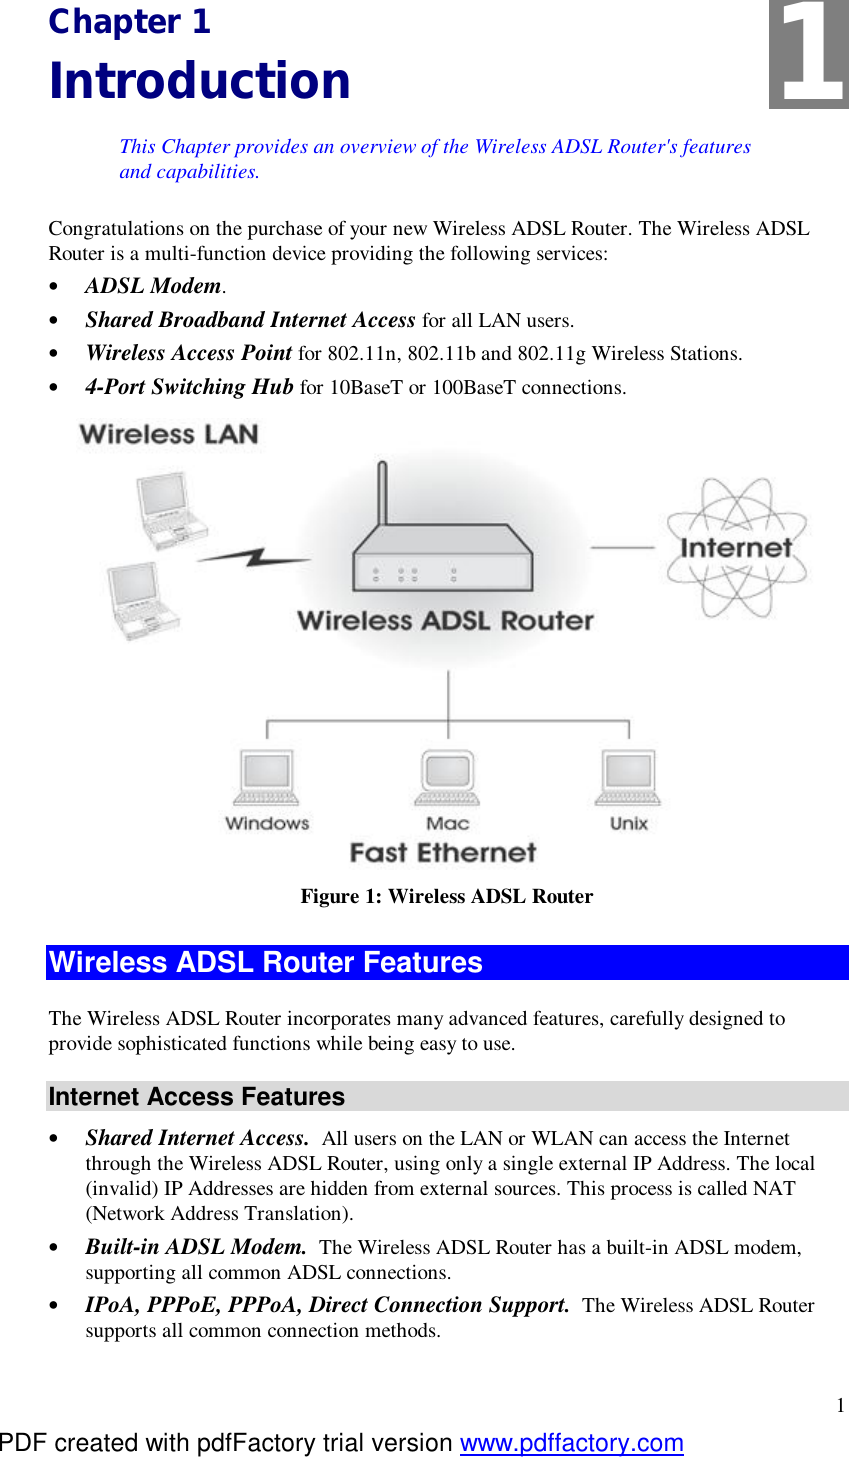  1 Chapter 1 Introduction This Chapter provides an overview of the Wireless ADSL Router&apos;s features and capabilities. Congratulations on the purchase of your new Wireless ADSL Router. The Wireless ADSL Router is a multi-function device providing the following services: •  ADSL Modem. •  Shared Broadband Internet Access for all LAN users. •  Wireless Access Point for 802.11n, 802.11b and 802.11g Wireless Stations. •  4-Port Switching Hub for 10BaseT or 100BaseT connections.  Figure 1: Wireless ADSL Router Wireless ADSL Router Features The Wireless ADSL Router incorporates many advanced features, carefully designed to provide sophisticated functions while being easy to use. Internet Access Features •  Shared Internet Access.  All users on the LAN or WLAN can access the Internet through the Wireless ADSL Router, using only a single external IP Address. The local (invalid) IP Addresses are hidden from external sources. This process is called NAT (Network Address Translation). •  Built-in ADSL Modem.  The Wireless ADSL Router has a built-in ADSL modem, supporting all common ADSL connections. •  IPoA, PPPoE, PPPoA, Direct Connection Support.  The Wireless ADSL Router supports all common connection methods. 1 PDF created with pdfFactory trial version www.pdffactory.com